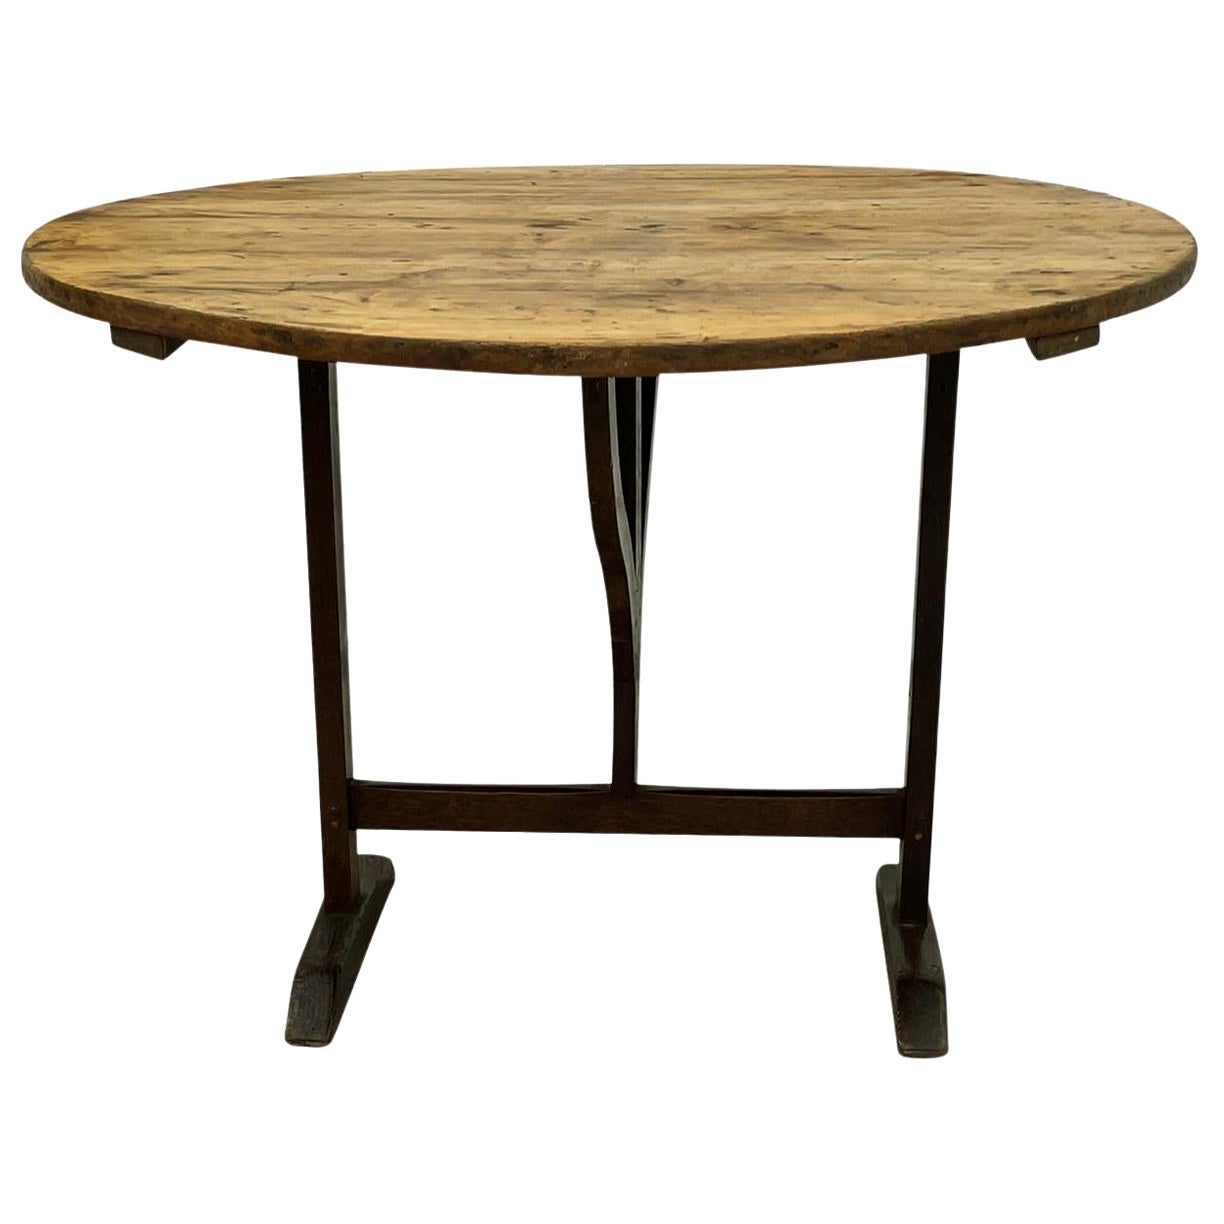 19th Century French Provincial Walnut Folding Wine Table - Antique Side Table